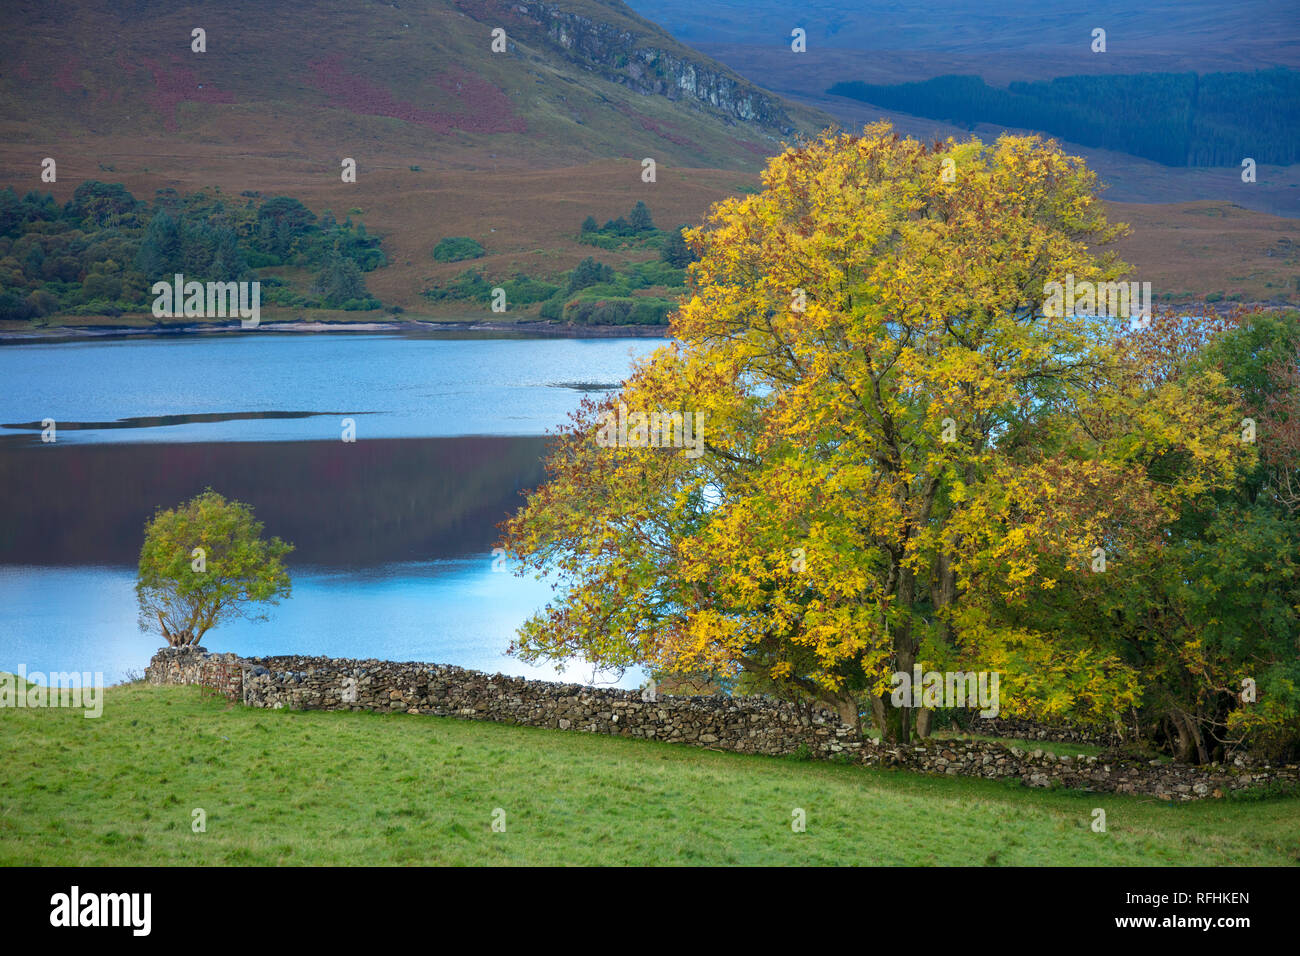 Herbst Baum am Ufer des Lough Dunlewy, County Donegal, Irland. Stockfoto